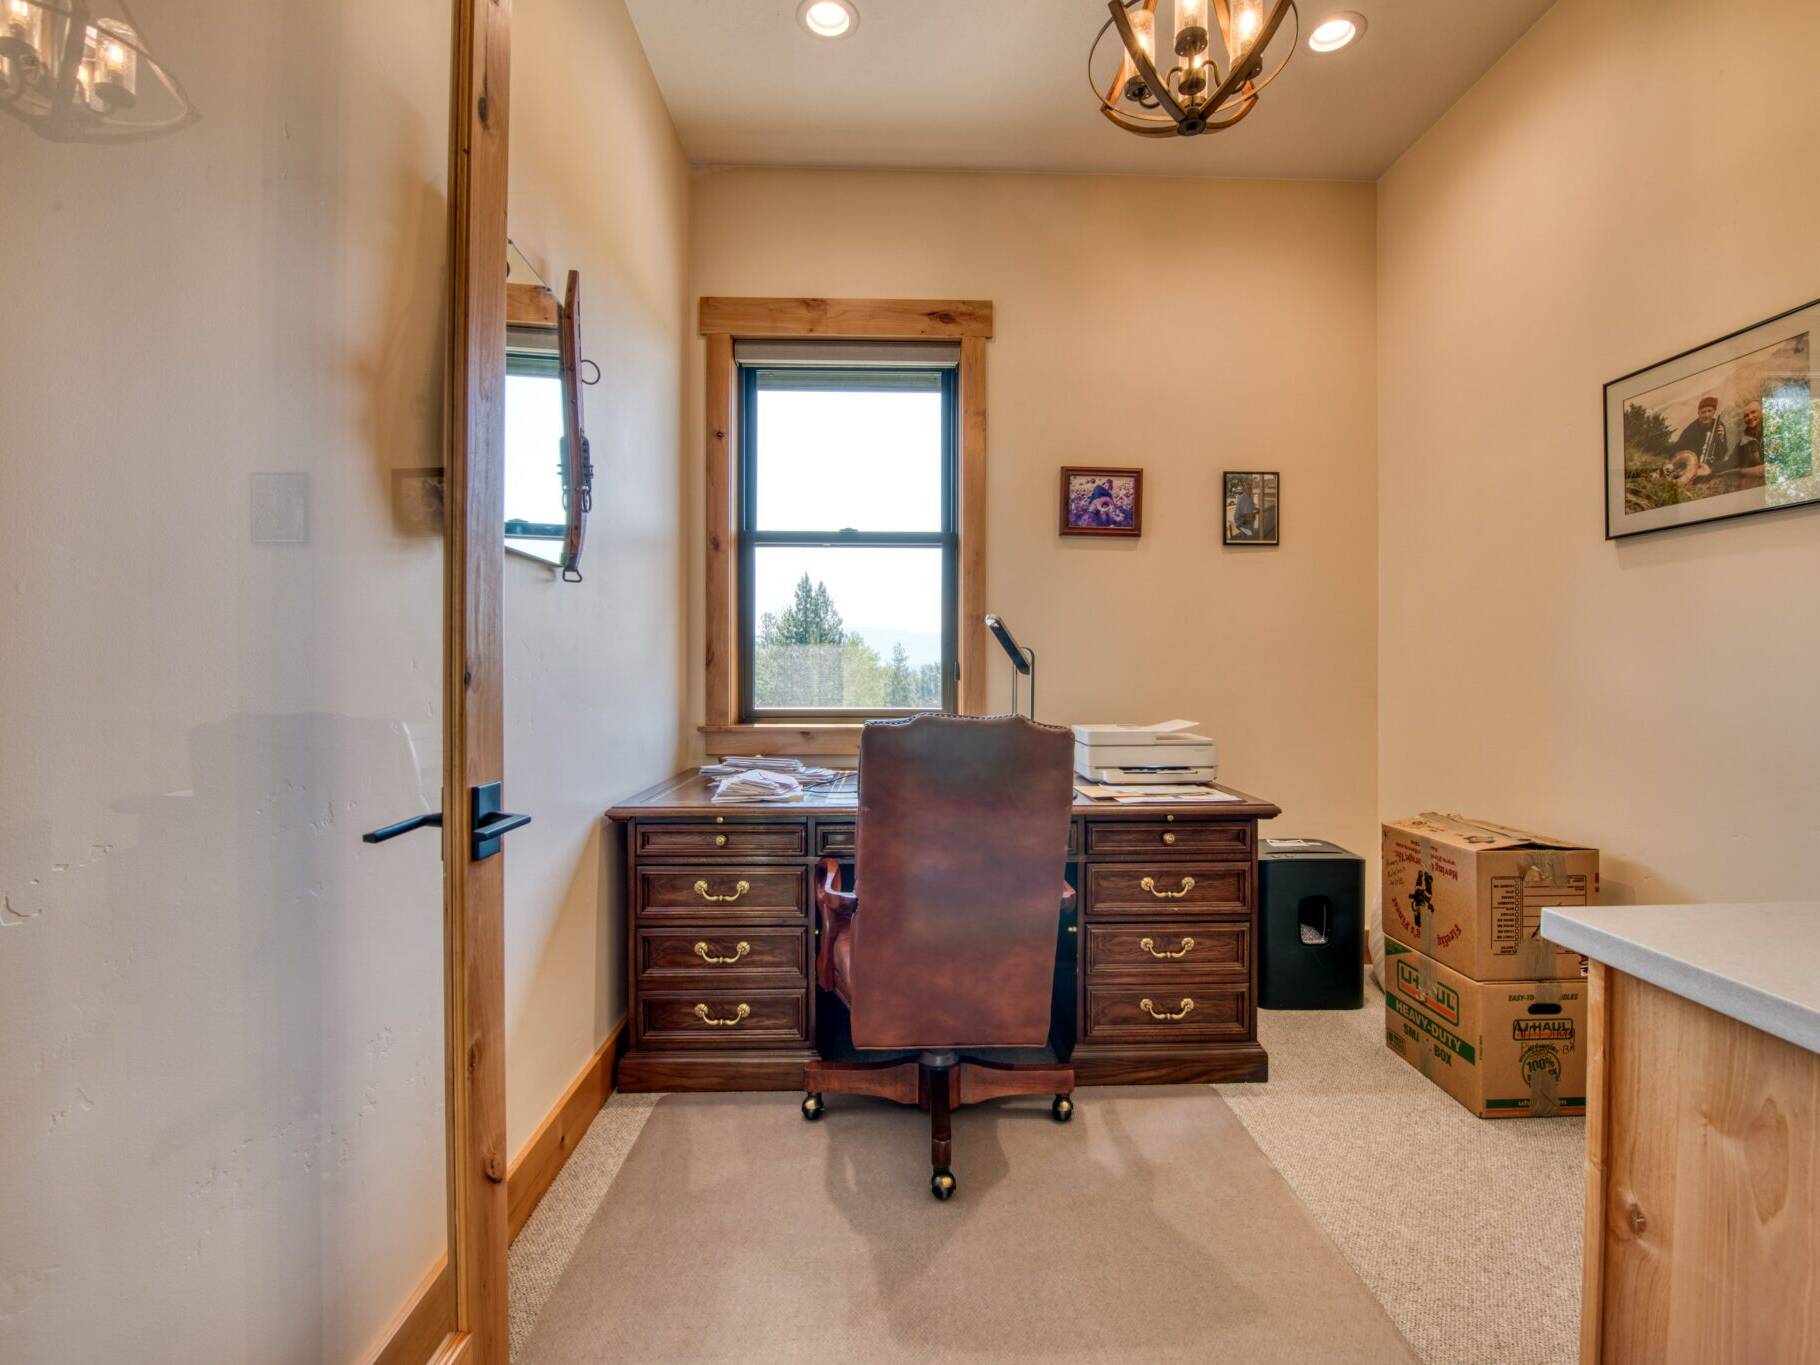 Office in a custom home built by Big Sky Builders of Monana in Florence, MT